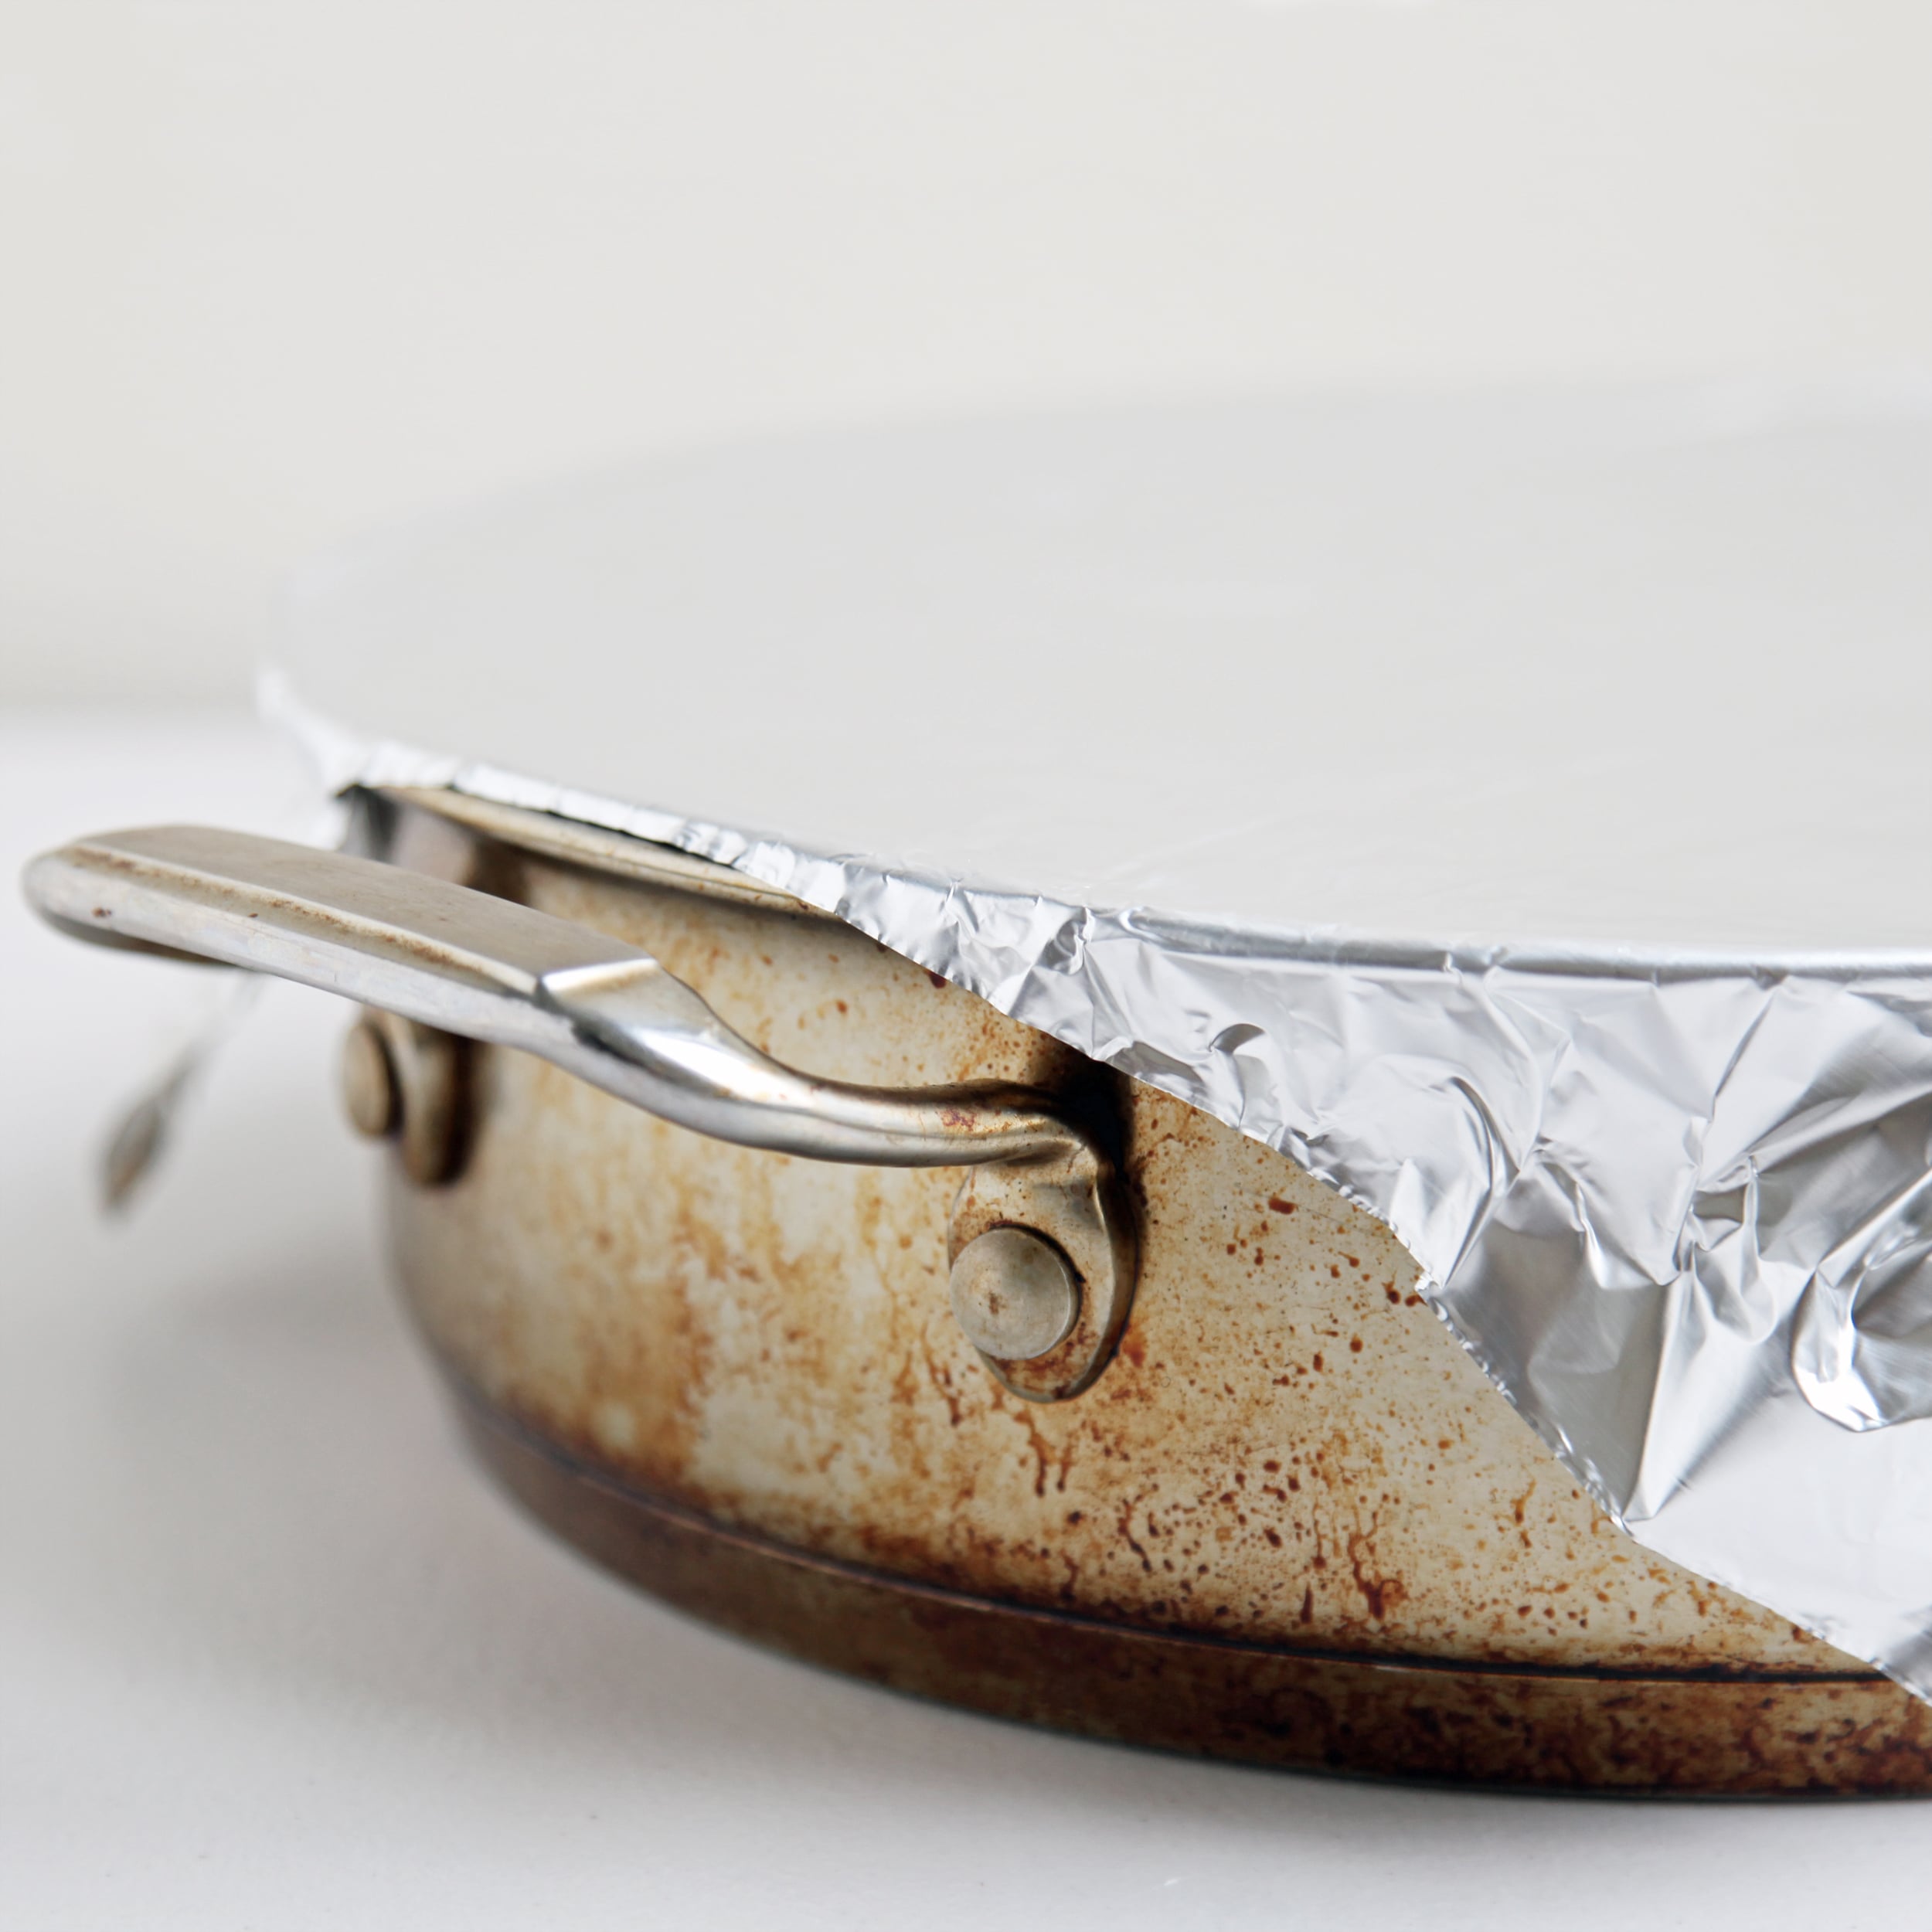 When Pot Lids Just Don't Fit, Get A Tight Seal With Aluminum Foil